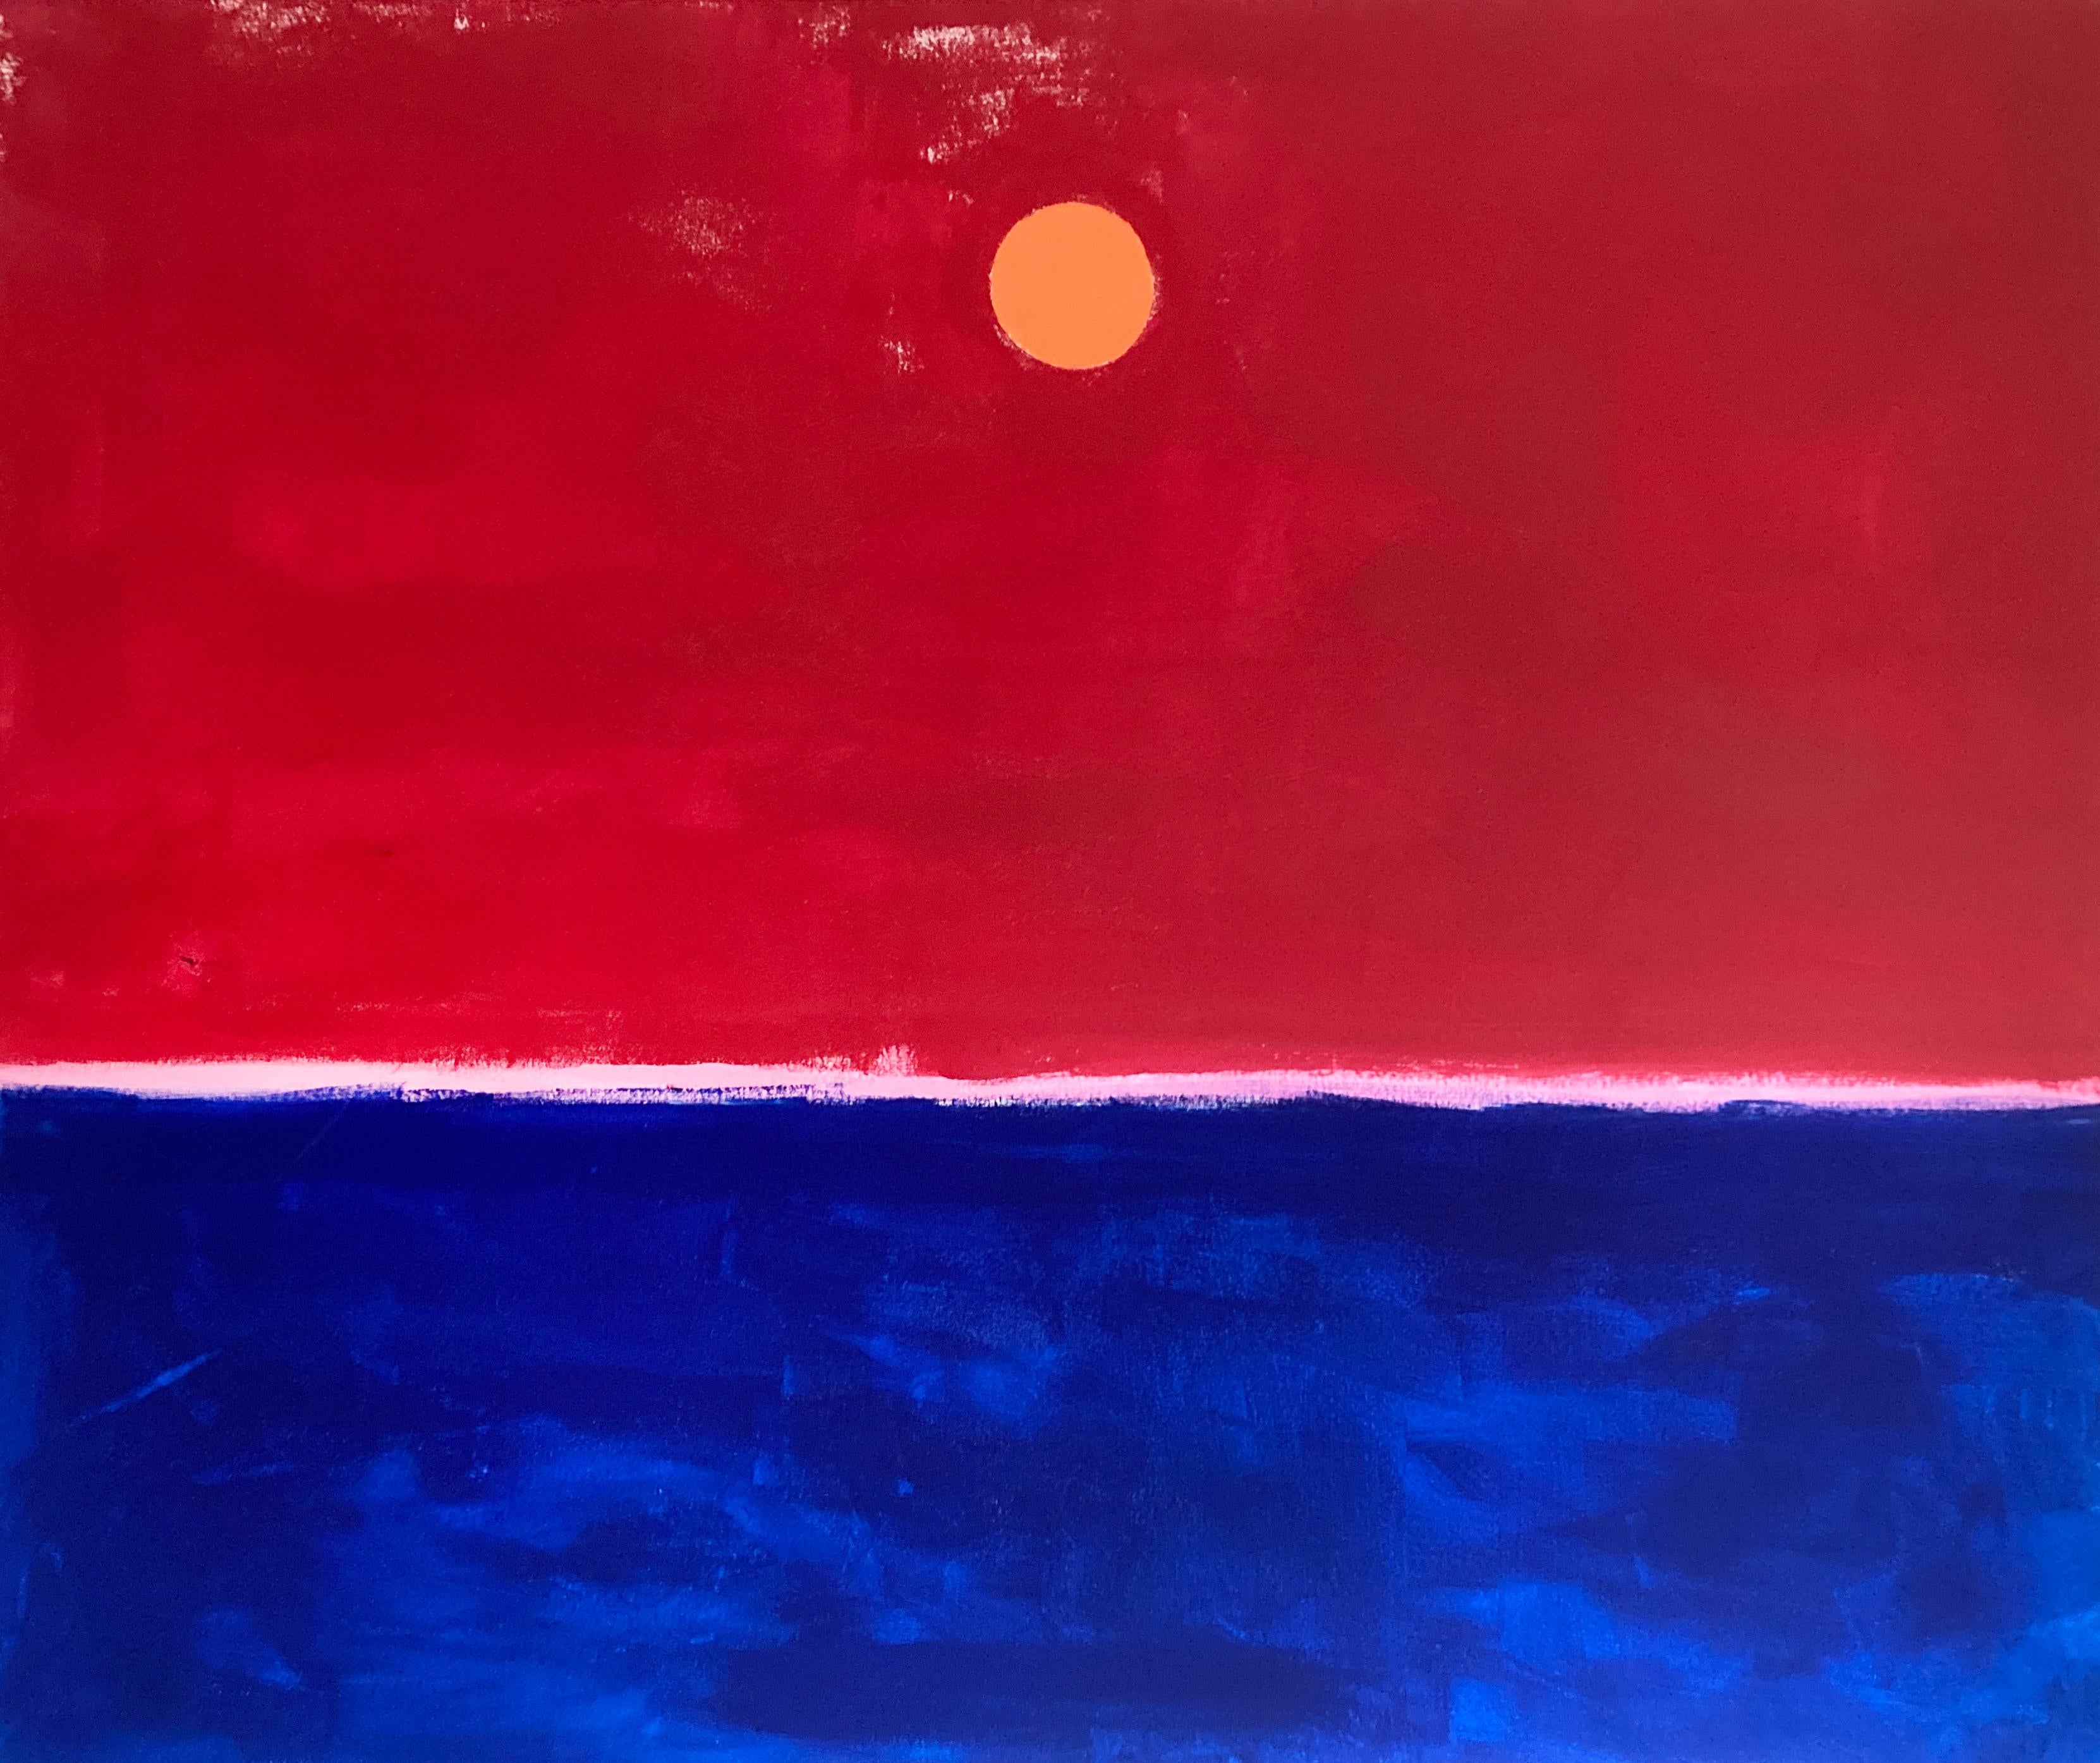 Horizon In Red and Blue, Contemporary Landscape Painting 